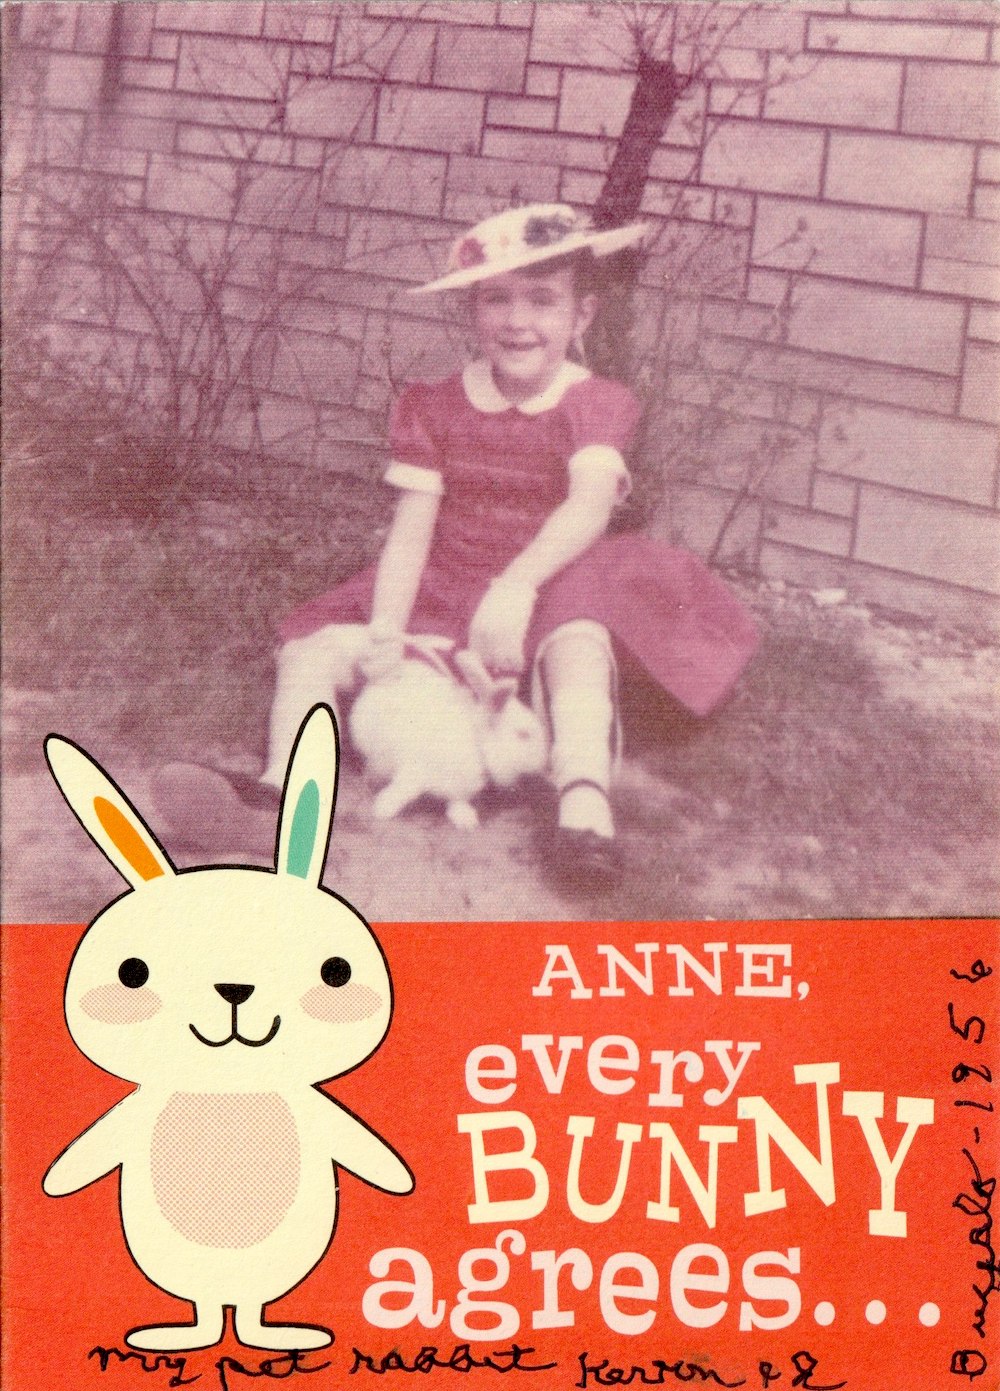 Anne and her pet rabbit Kevin featured on the signed family Easter card, 1956, Buffalo, NY. Photo courtesy of Anne Charles.